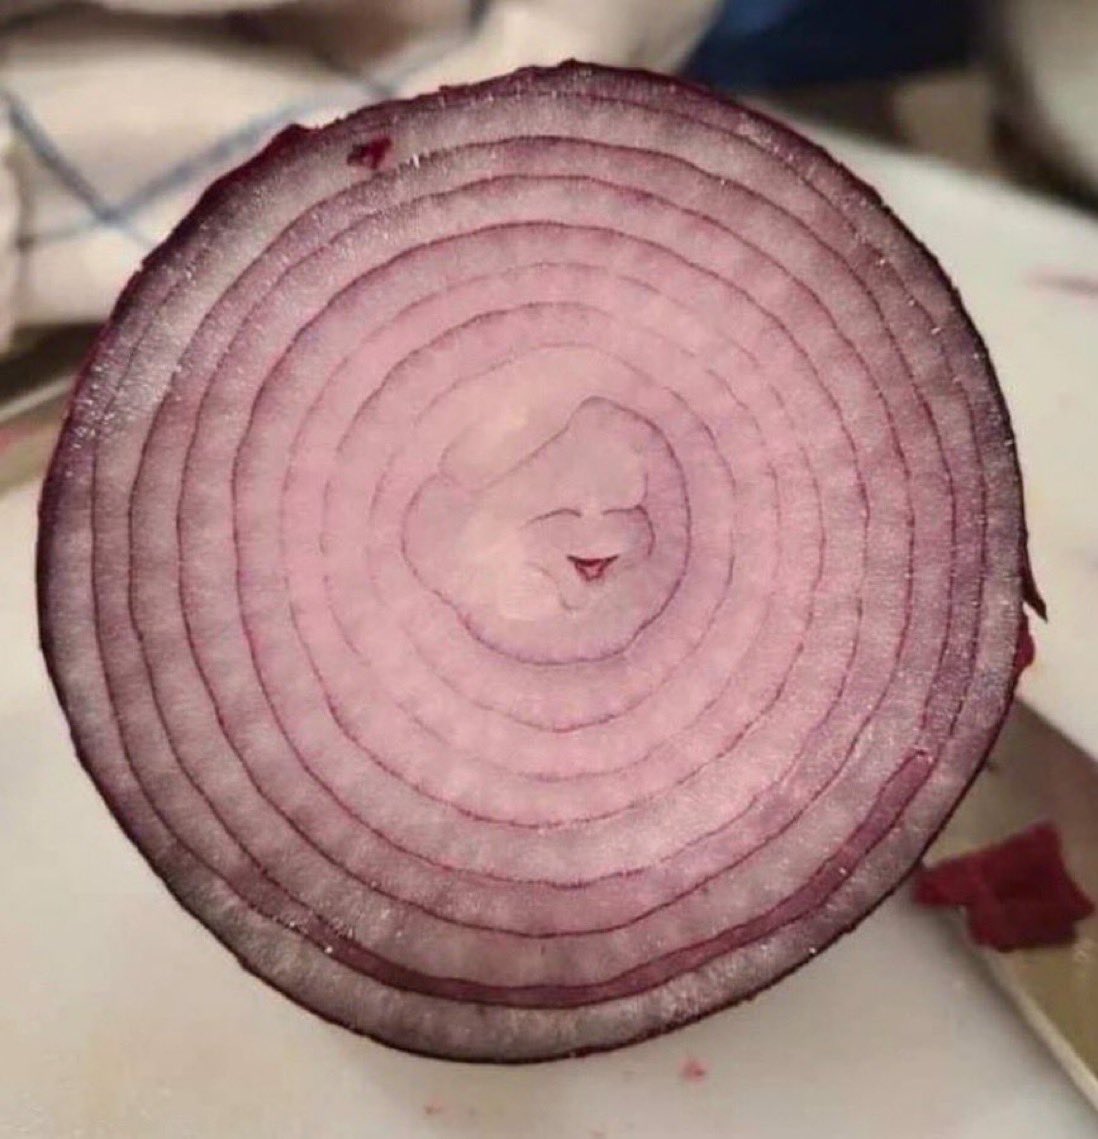 don't ignore the happy little onion and you will have the best year ever